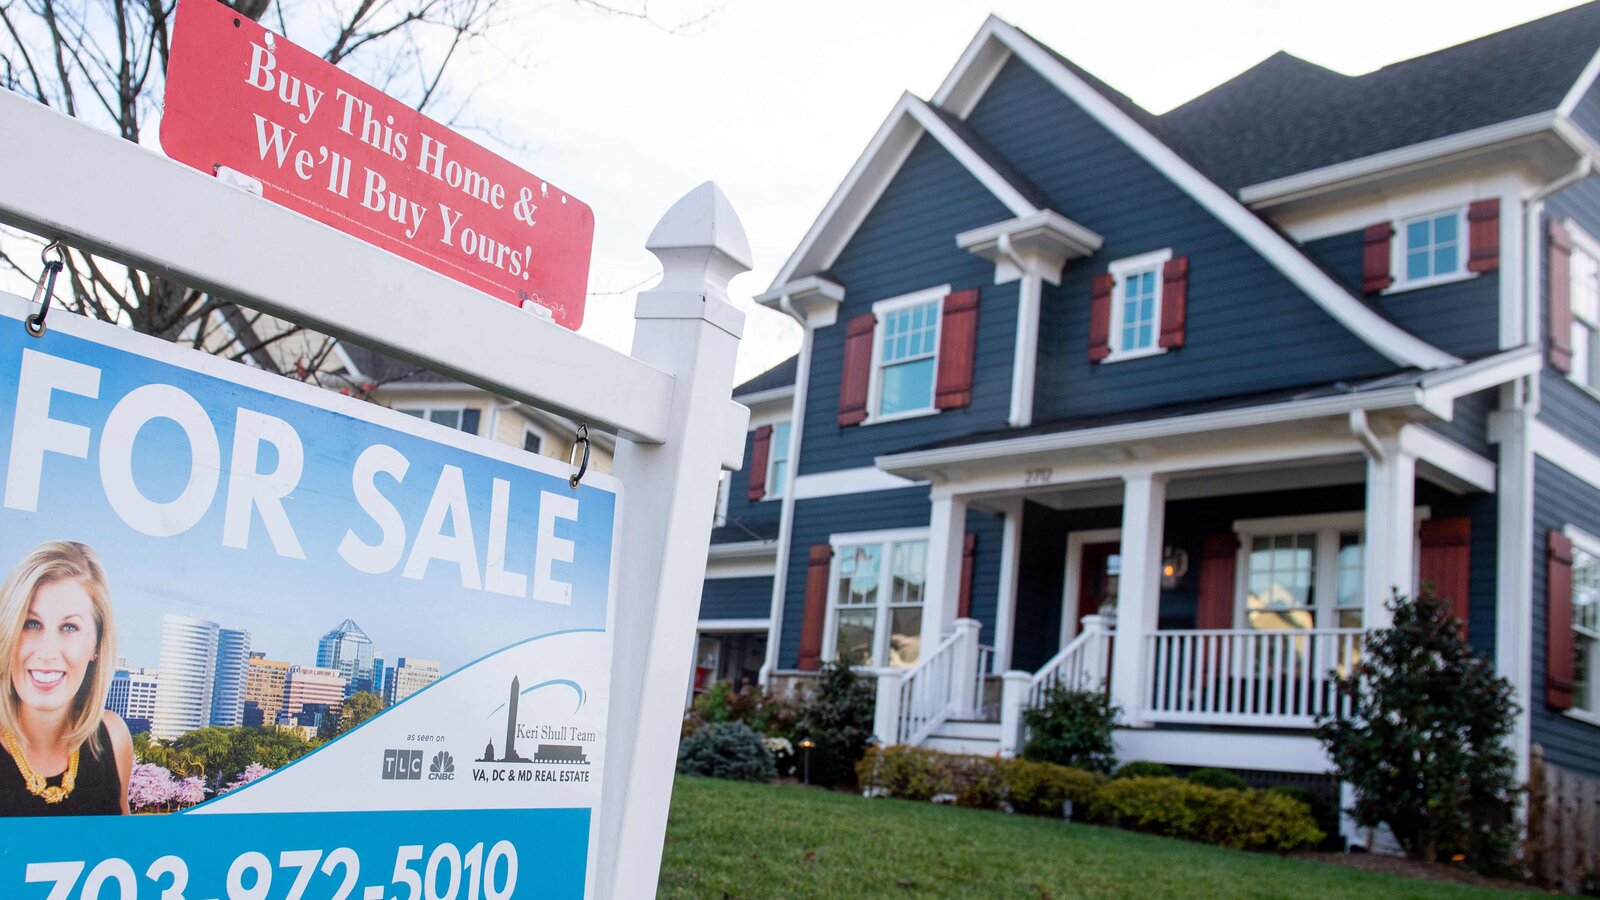 US existing home sales rise for the second month in a row in July